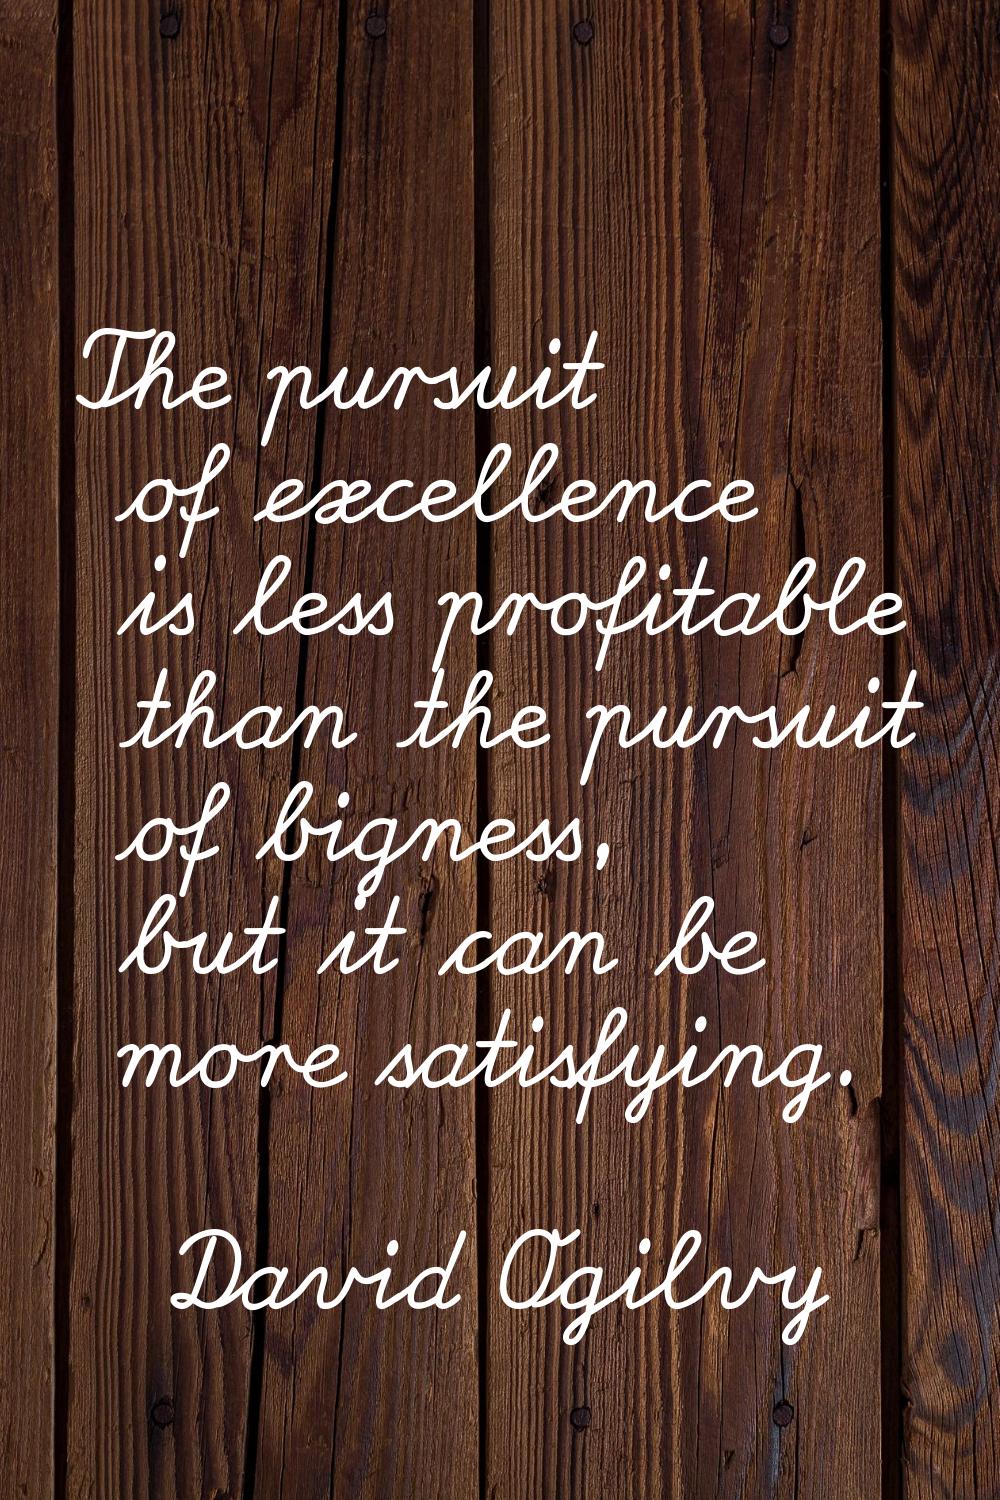 The pursuit of excellence is less profitable than the pursuit of bigness, but it can be more satisf